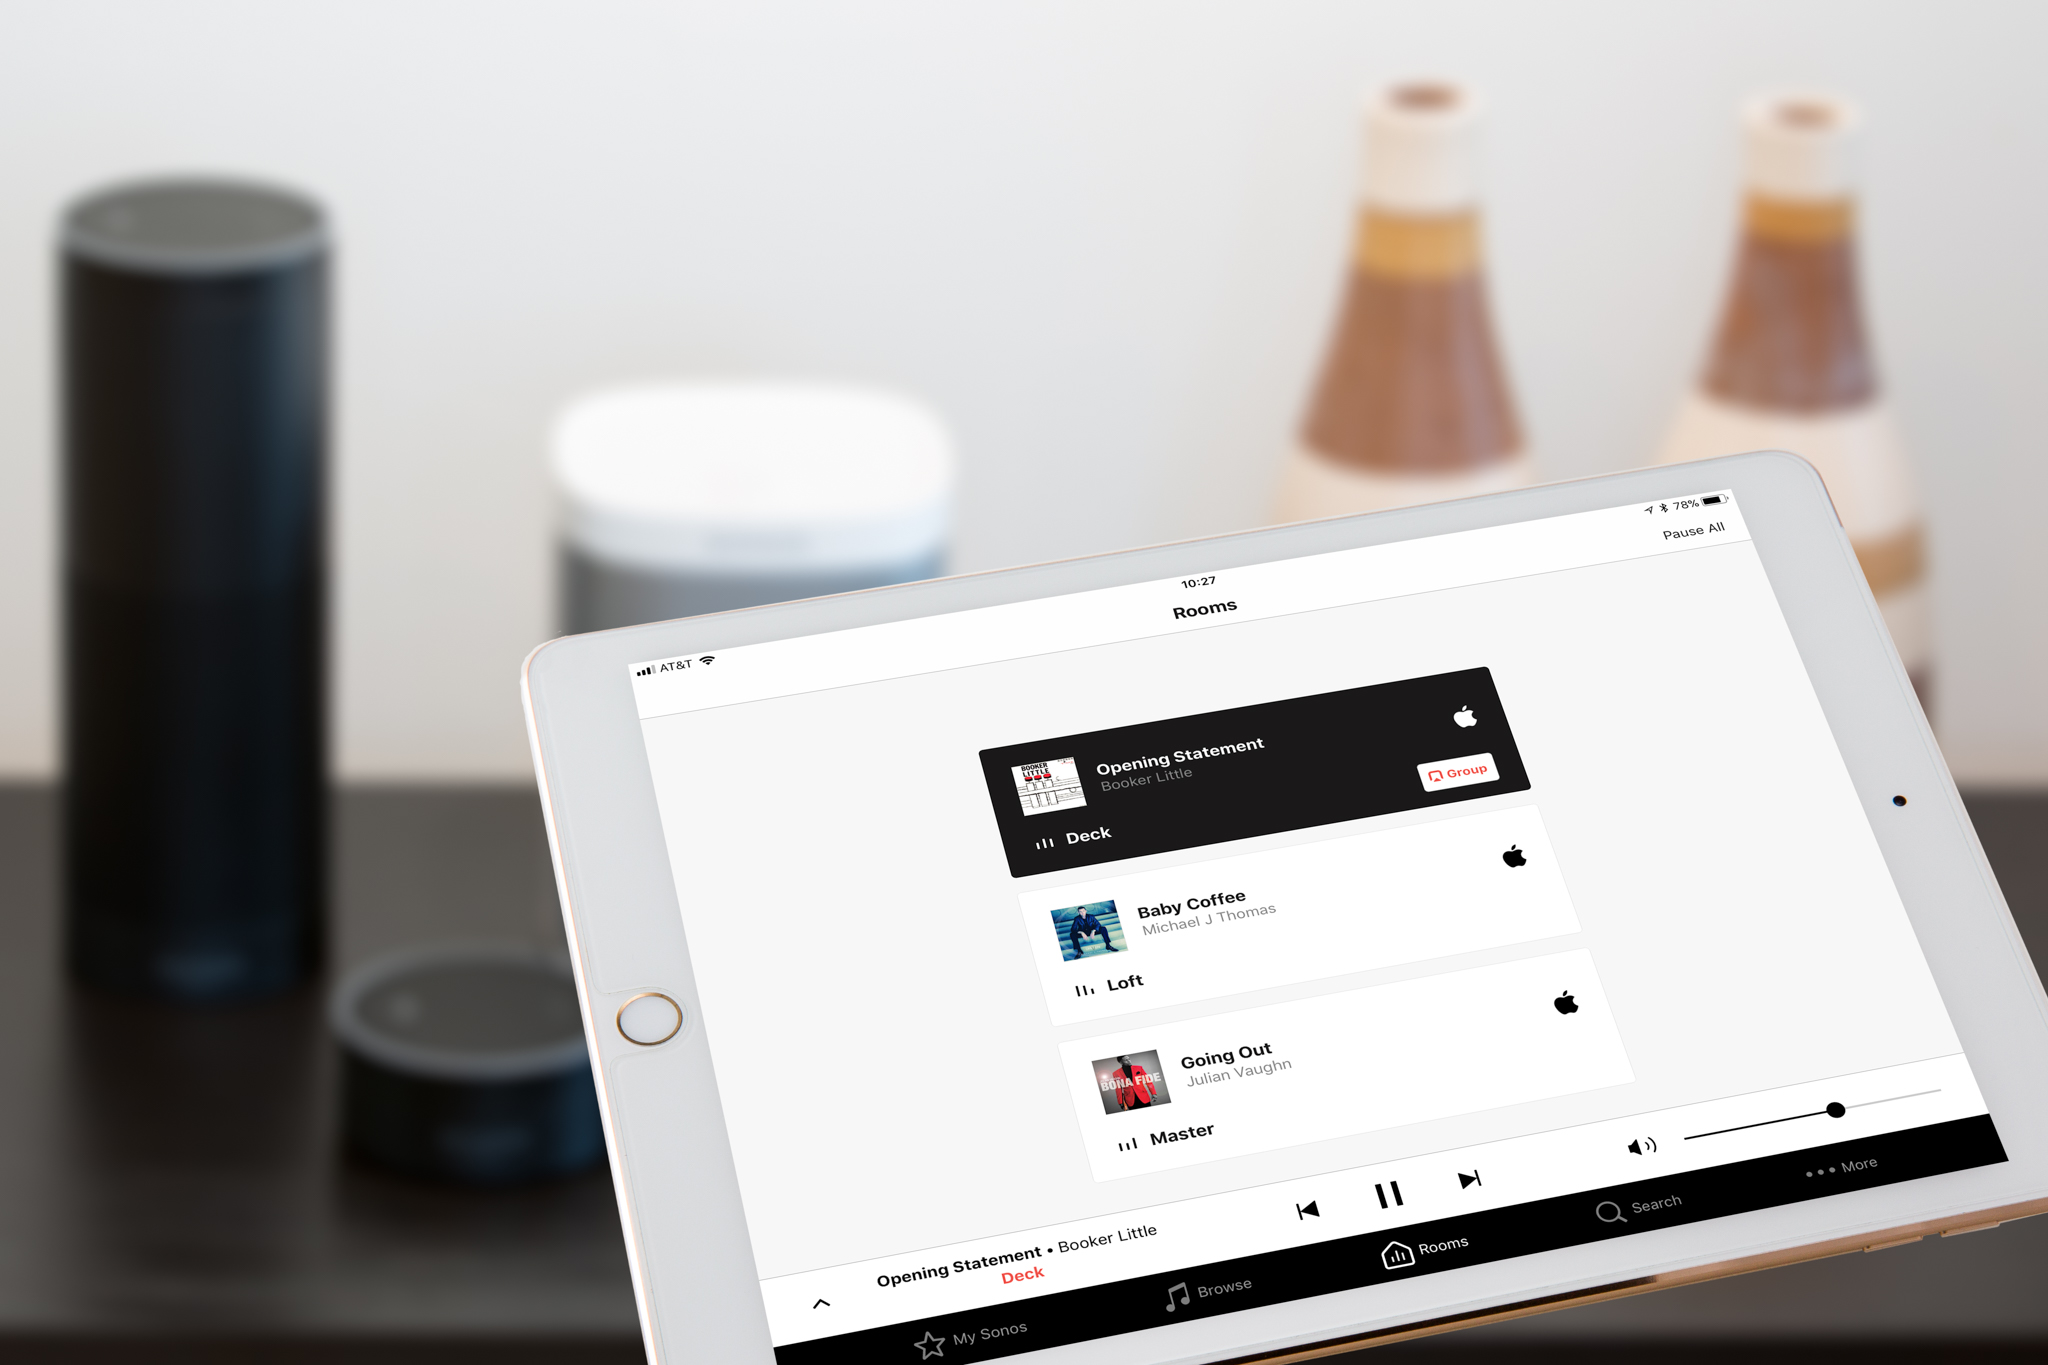 As a fully-participating player in all Sonos installations, the Sonos One can also be controlled via the Sonos app on tablets and smartphones. Image: Digitized House.